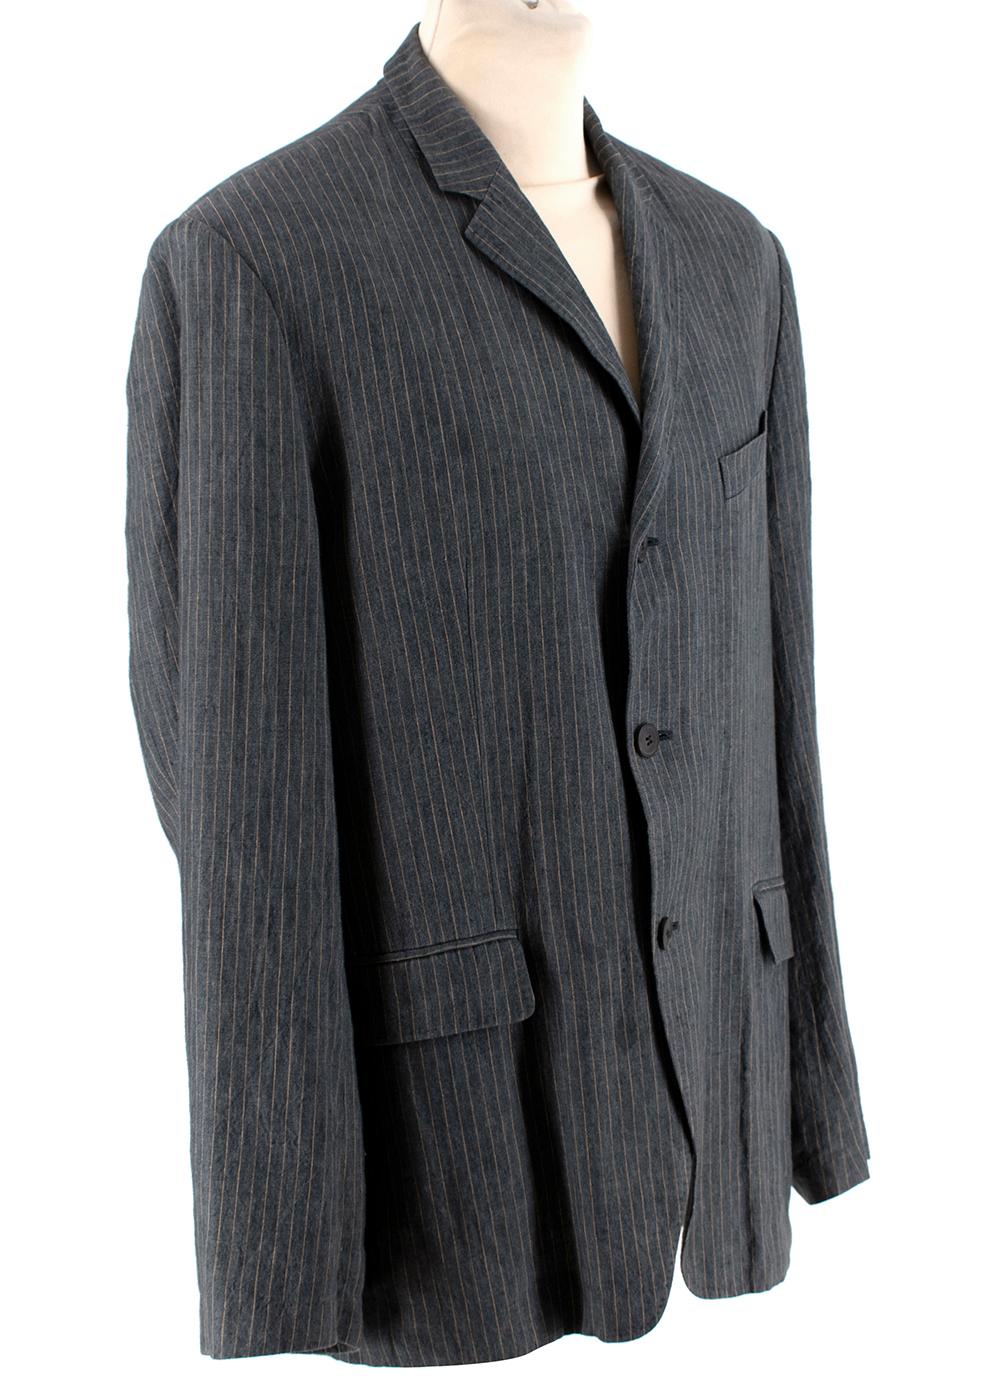 Dries Van Noten Grey Pinstripe Single Breasted Linen Suit

-Soft linen texture 
-Gorgeous yellow pinstripe pattern 
-Classic single breasted cut 
Jacket:
-3 pockets to the front 
-1 interior pocket
-Fully lined 
-Button fastening to the front